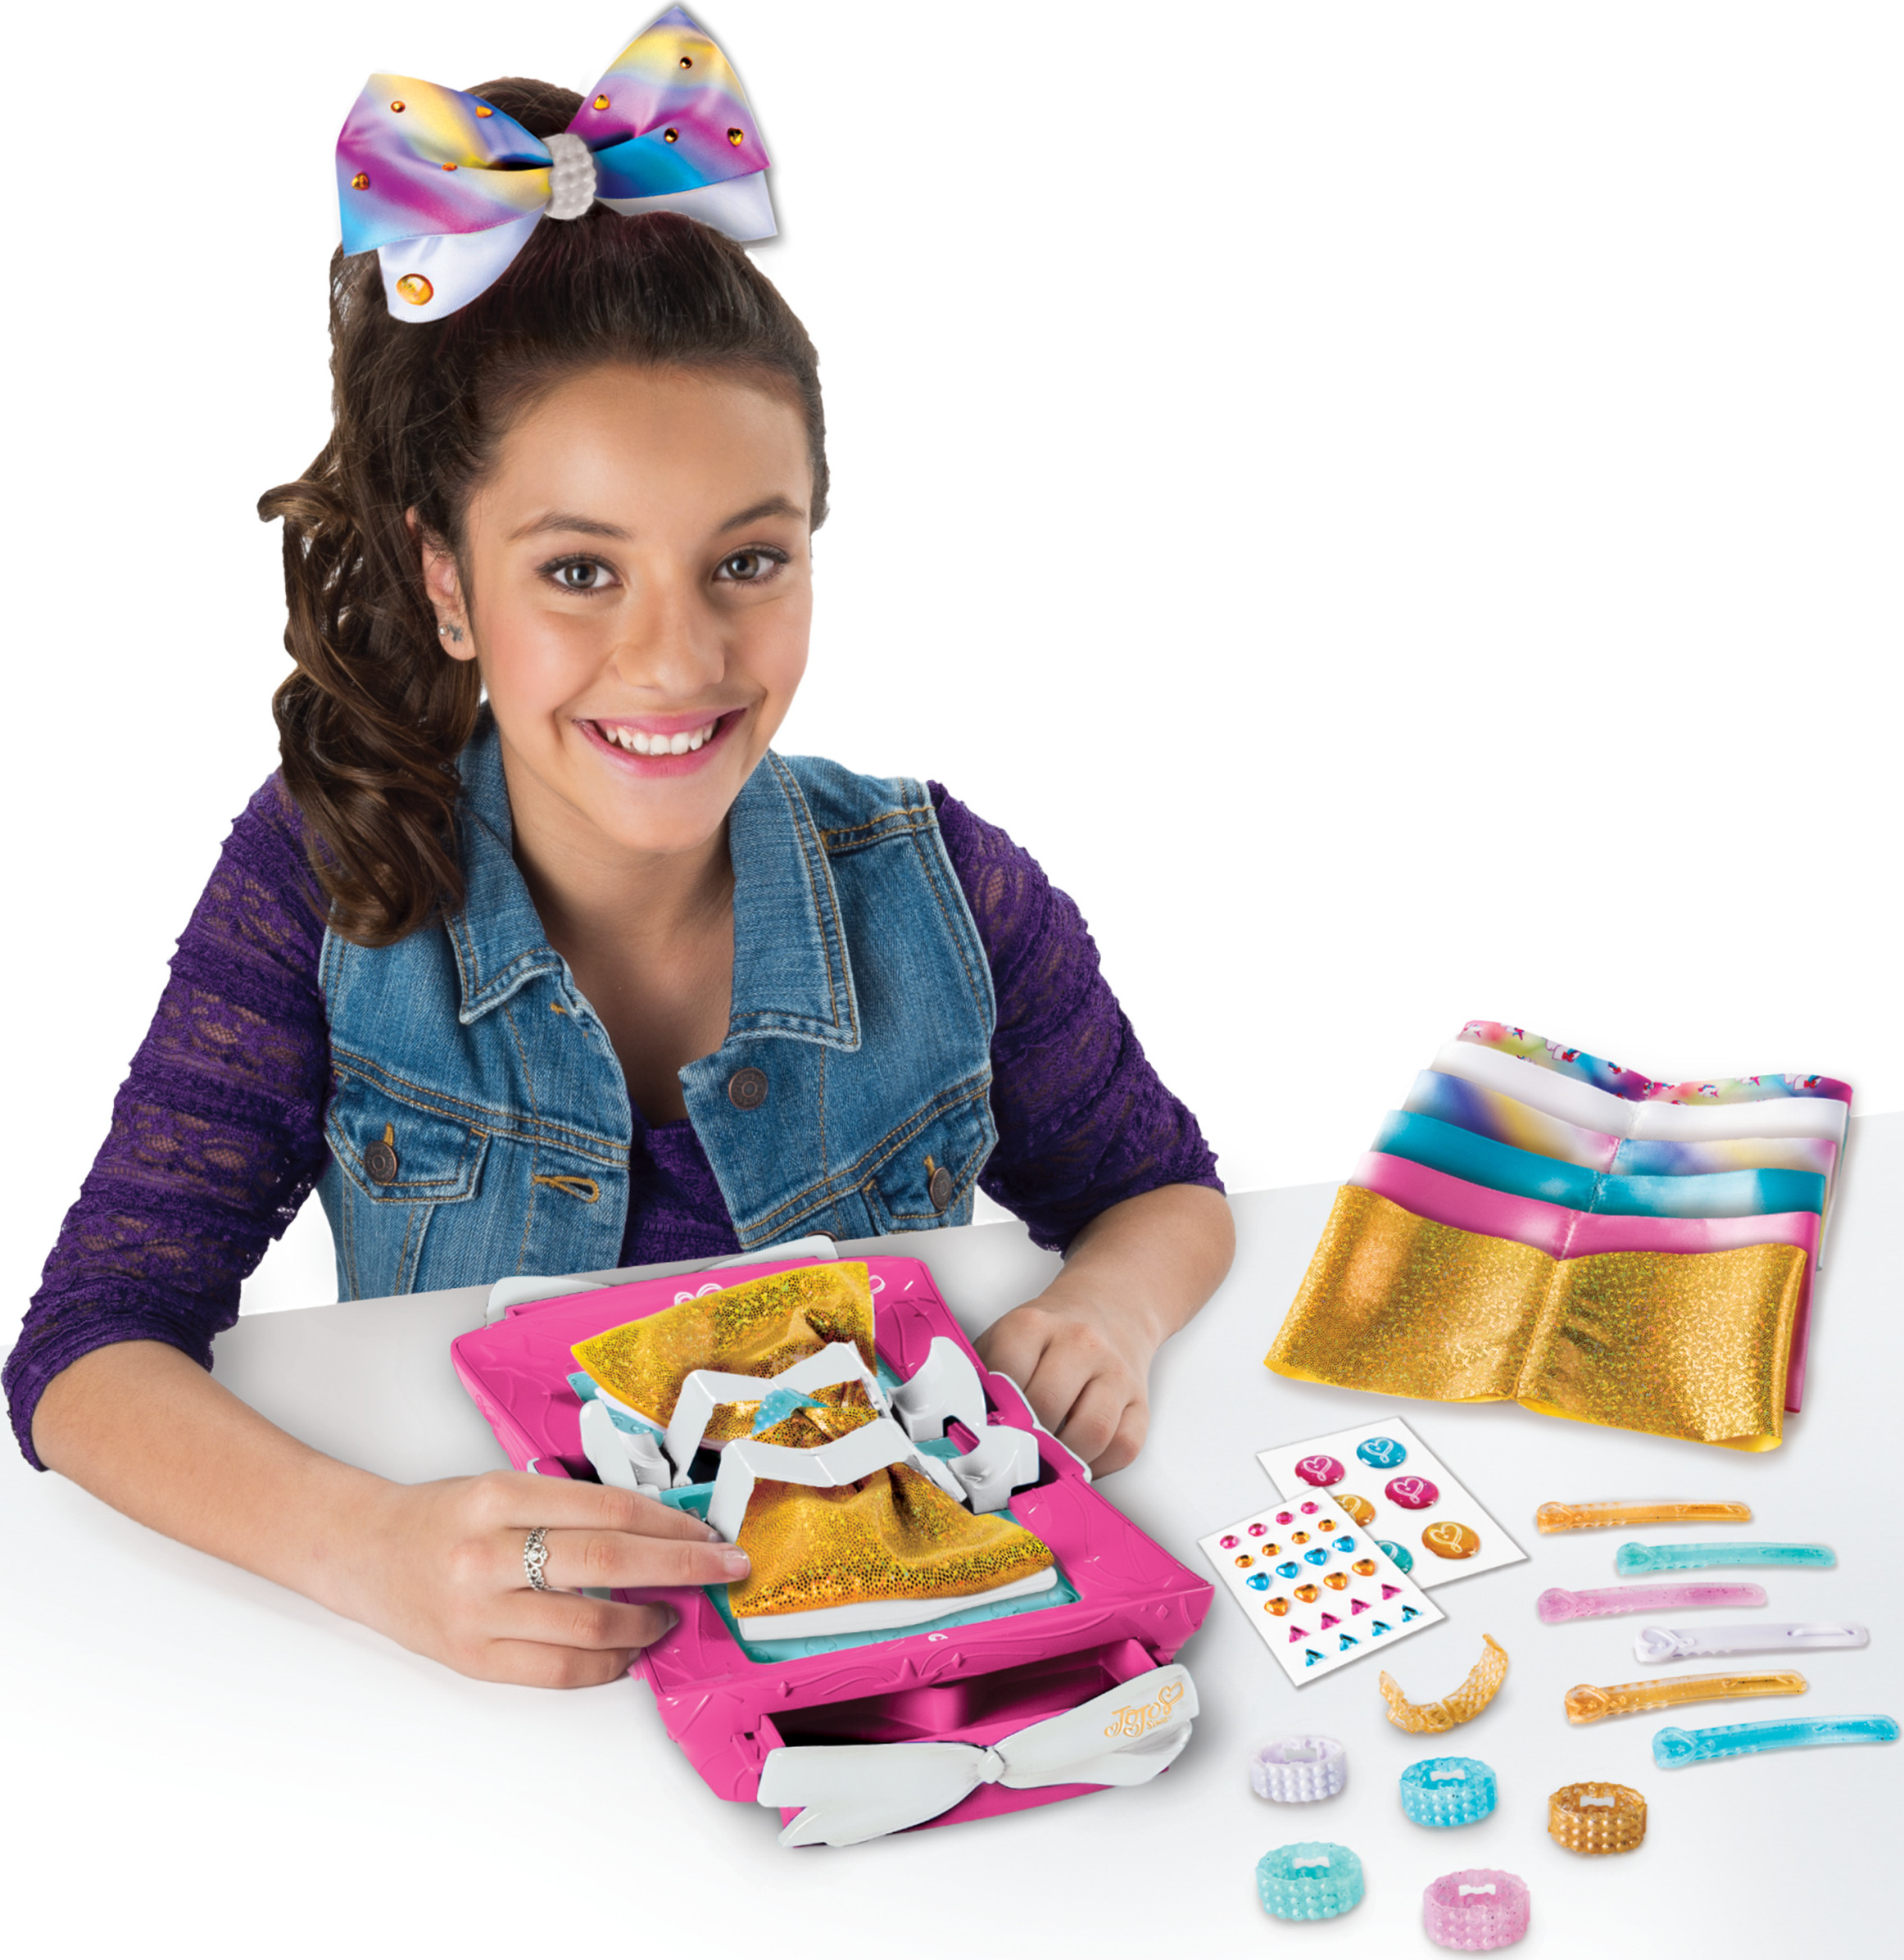 Cool Maker - JoJo Siwa Bow Maker with Rainbow and Unicorn Patterns, for Ages 6 and Up (Edition May Vary) - image 3 of 6